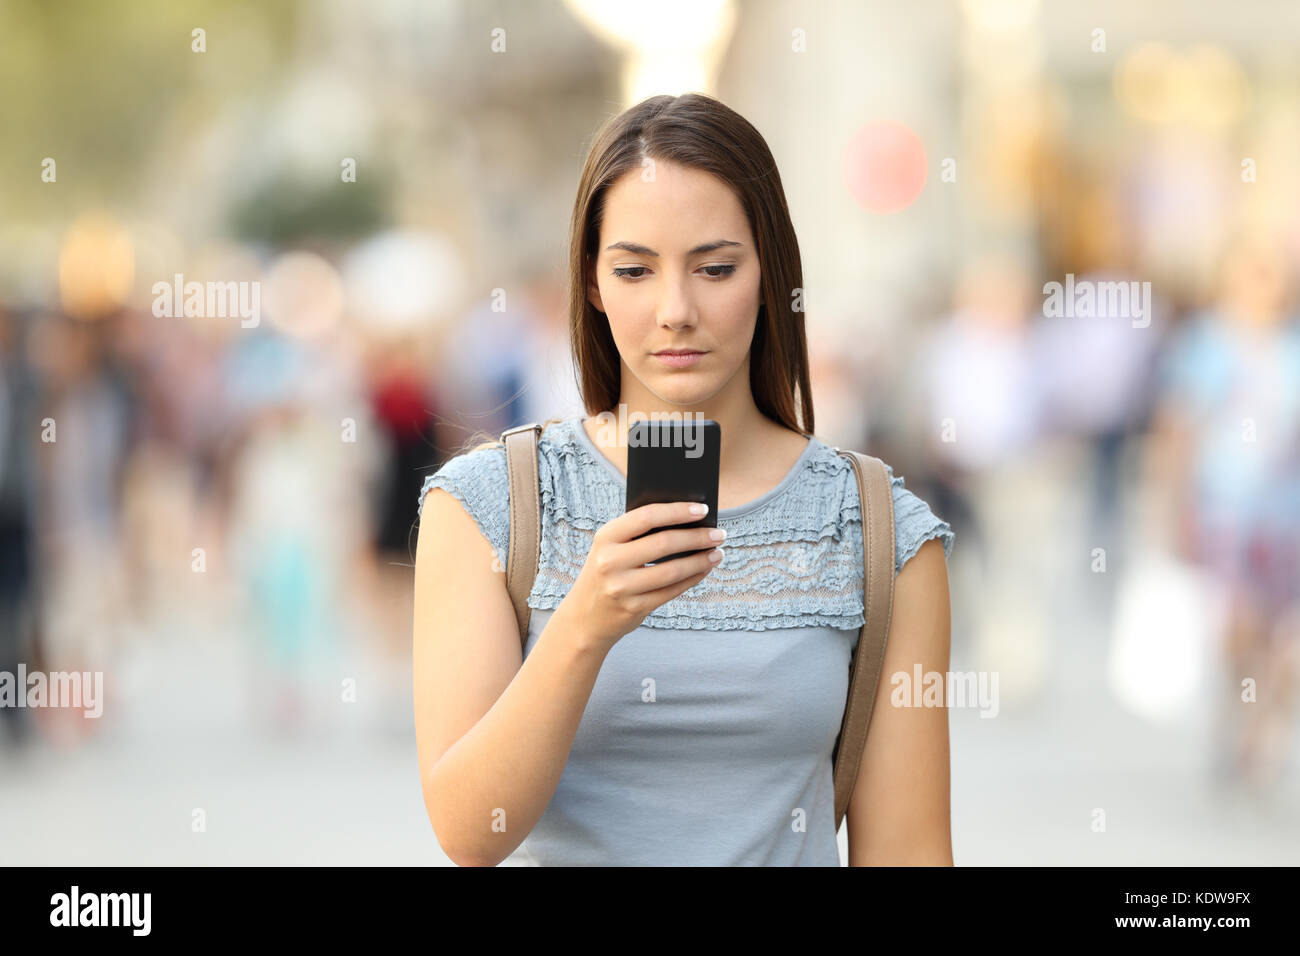 Front view of a serious girl checking a phone message walking on the street Stock Photo